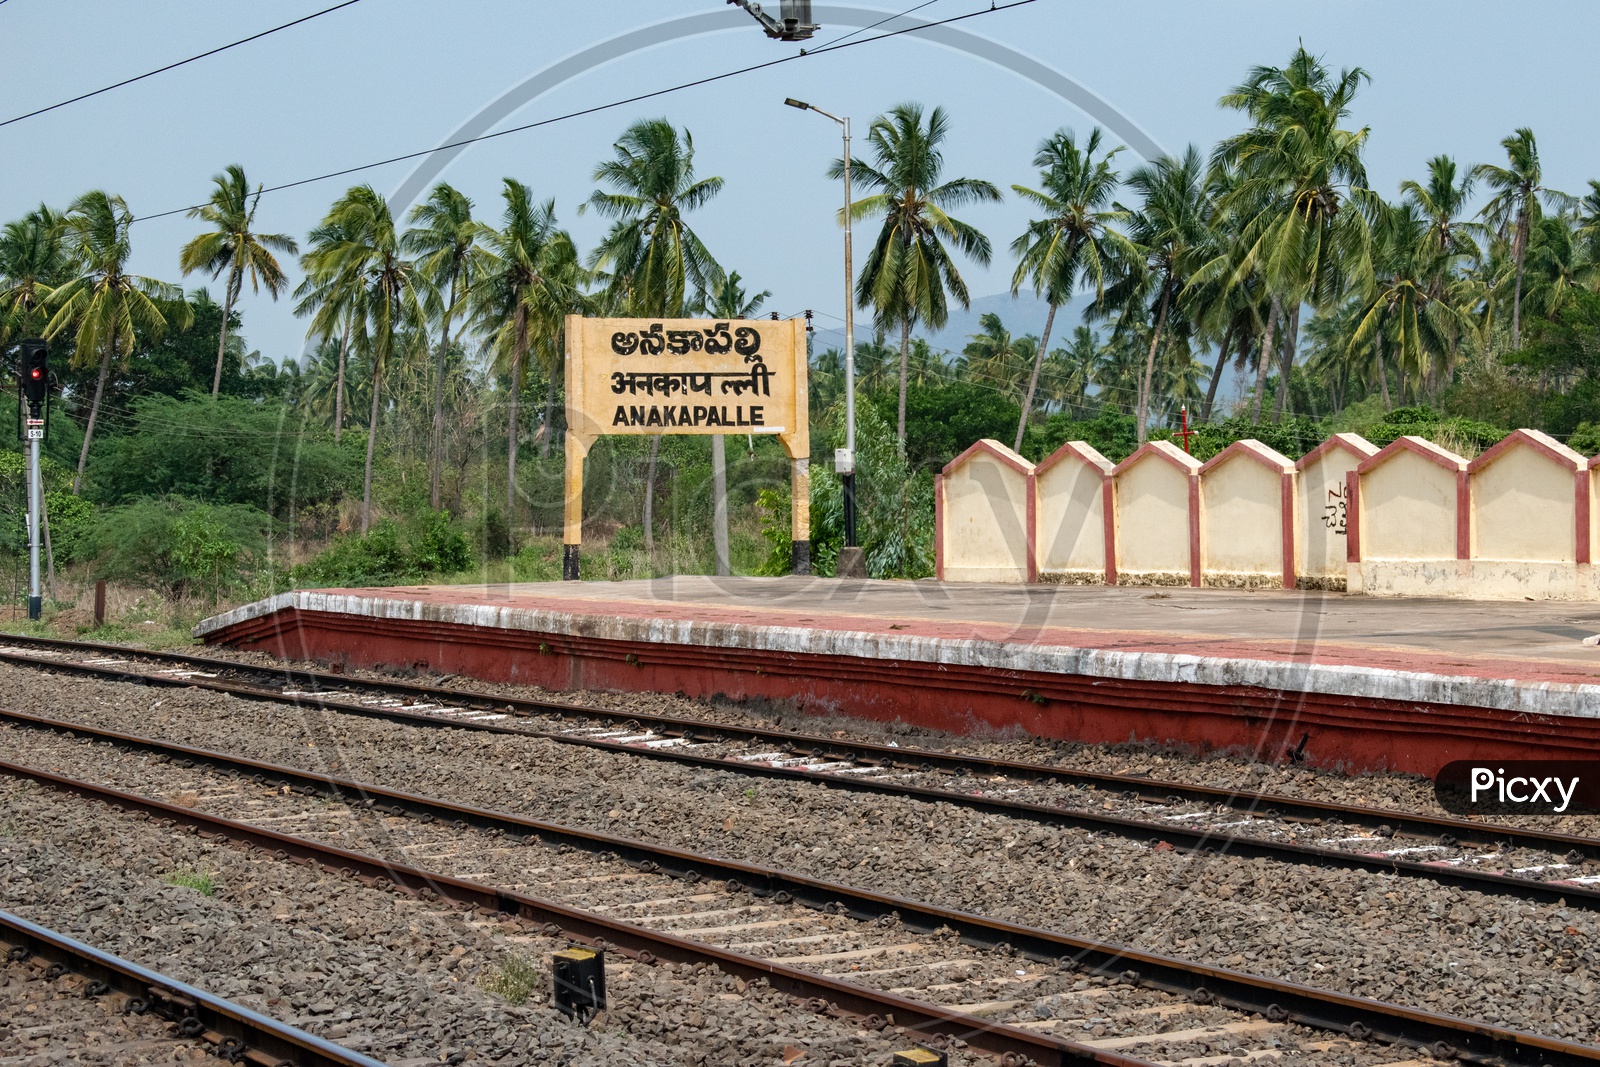 Indian railways sign board showing the name of Anakapalle station,Andhra Pradesh.